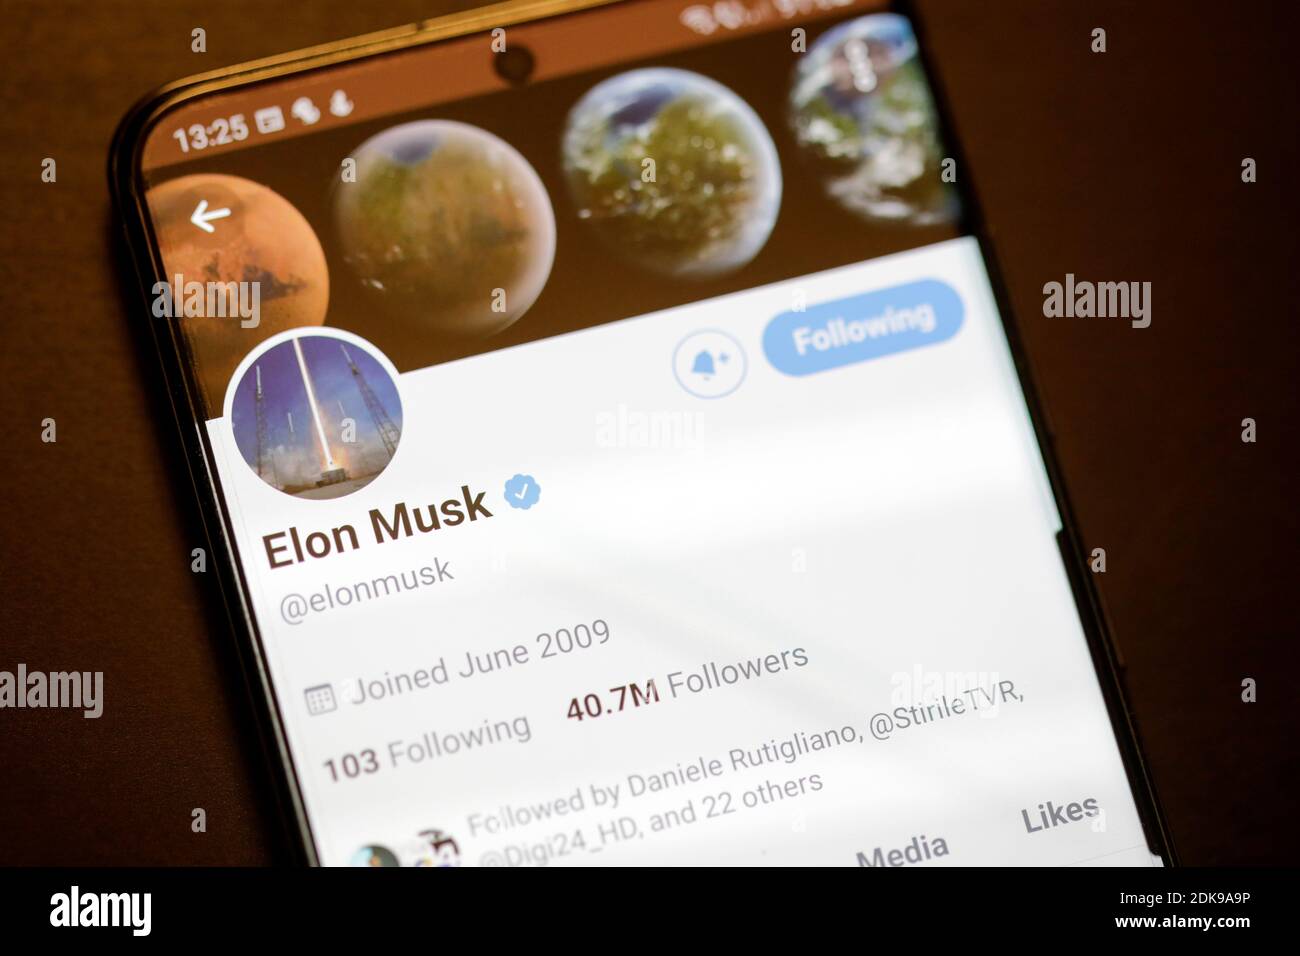 Bucharest, Romania - December 13, 2020: Details with the Twitter account of Elon Musk on a mobile device screen. Stock Photo